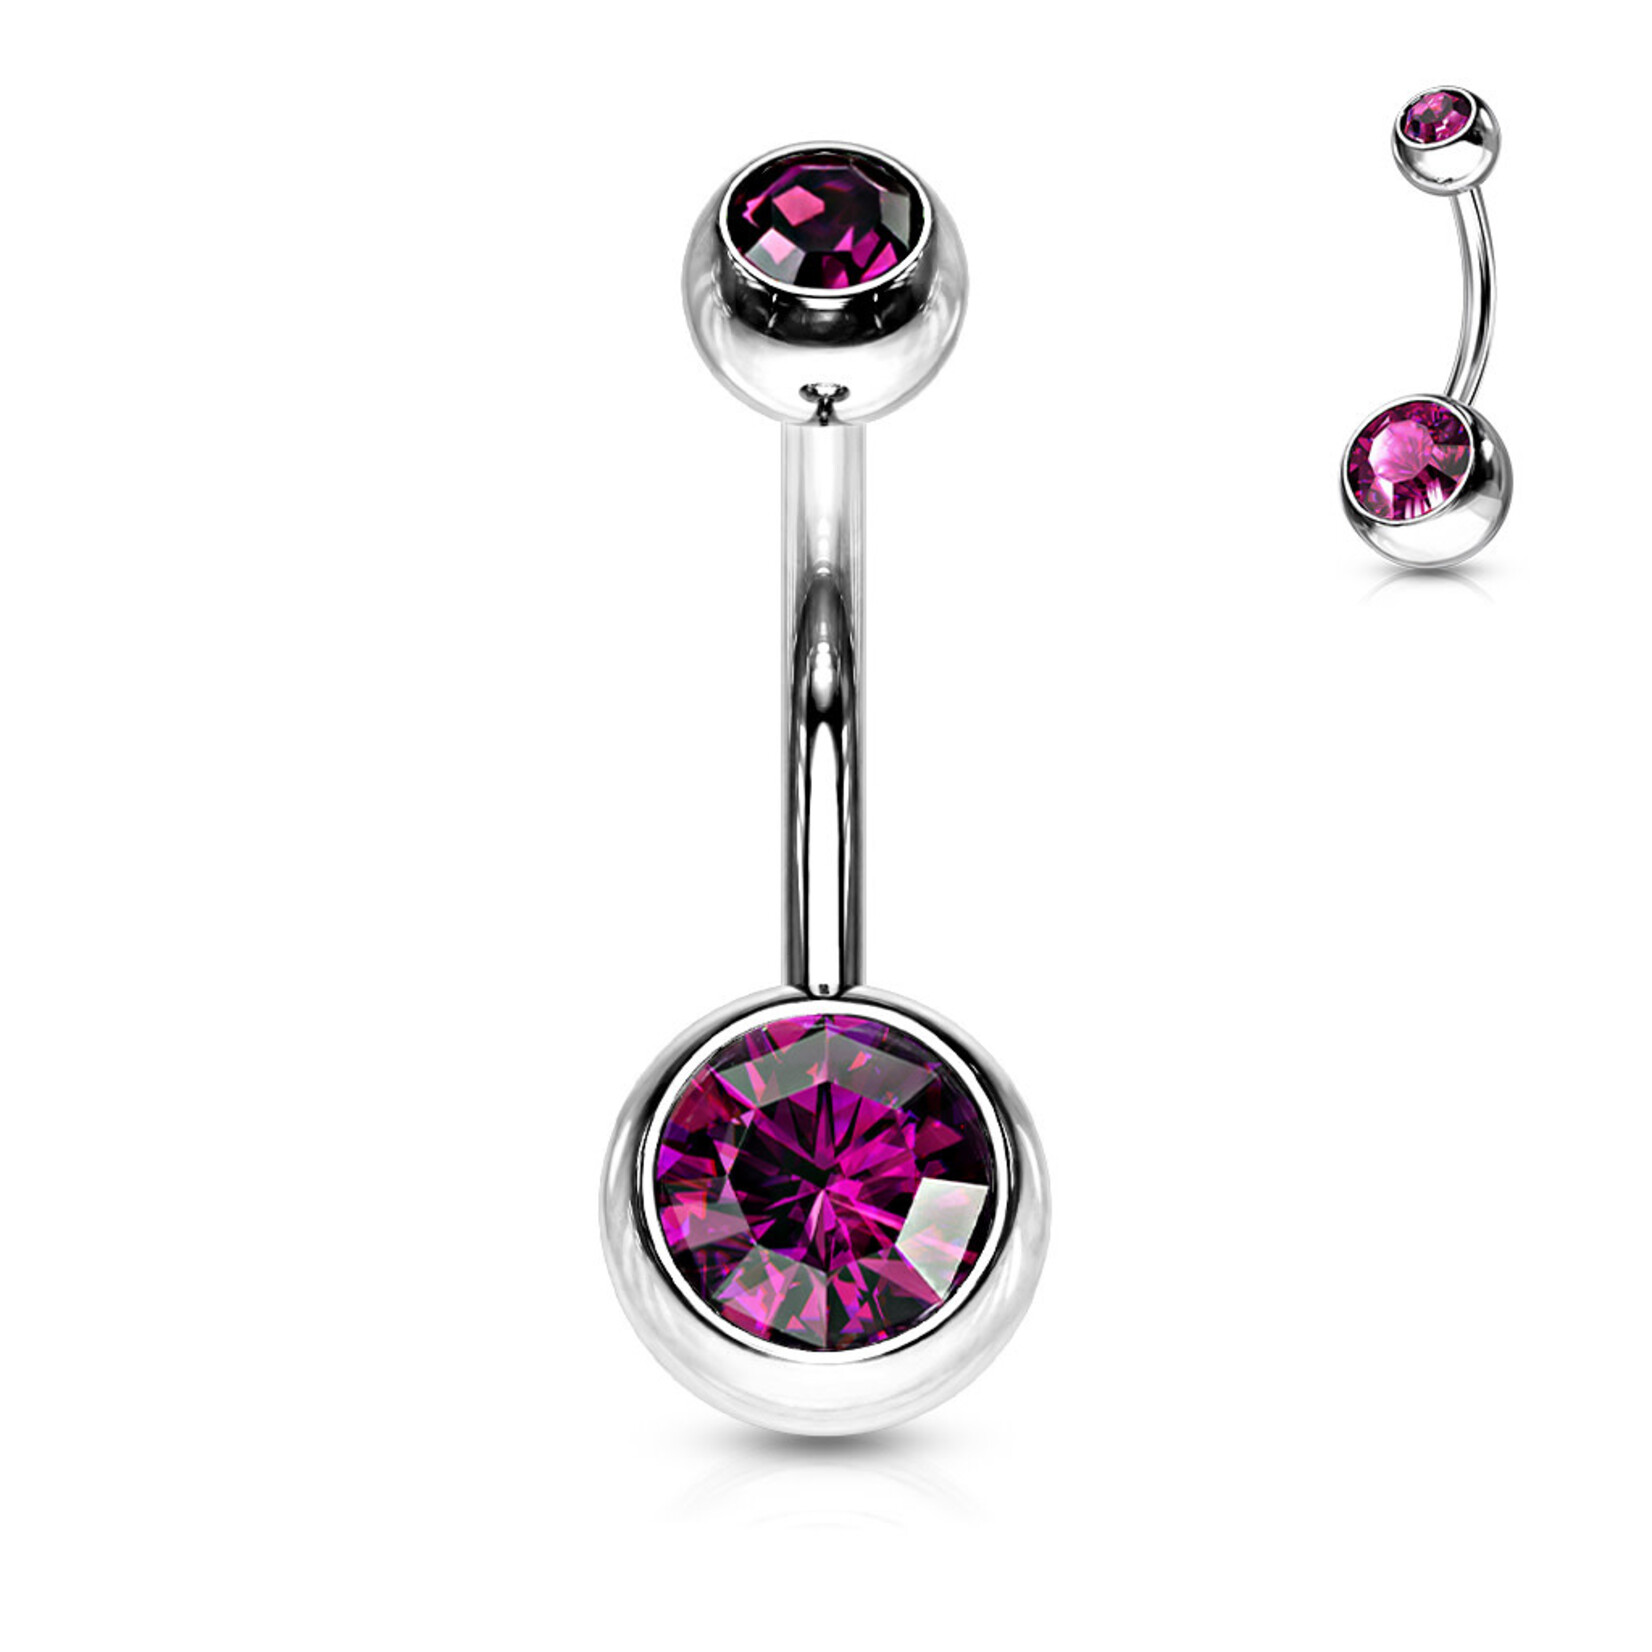 Hollywood Body Jewelry Double Jeweled Bent Barbells